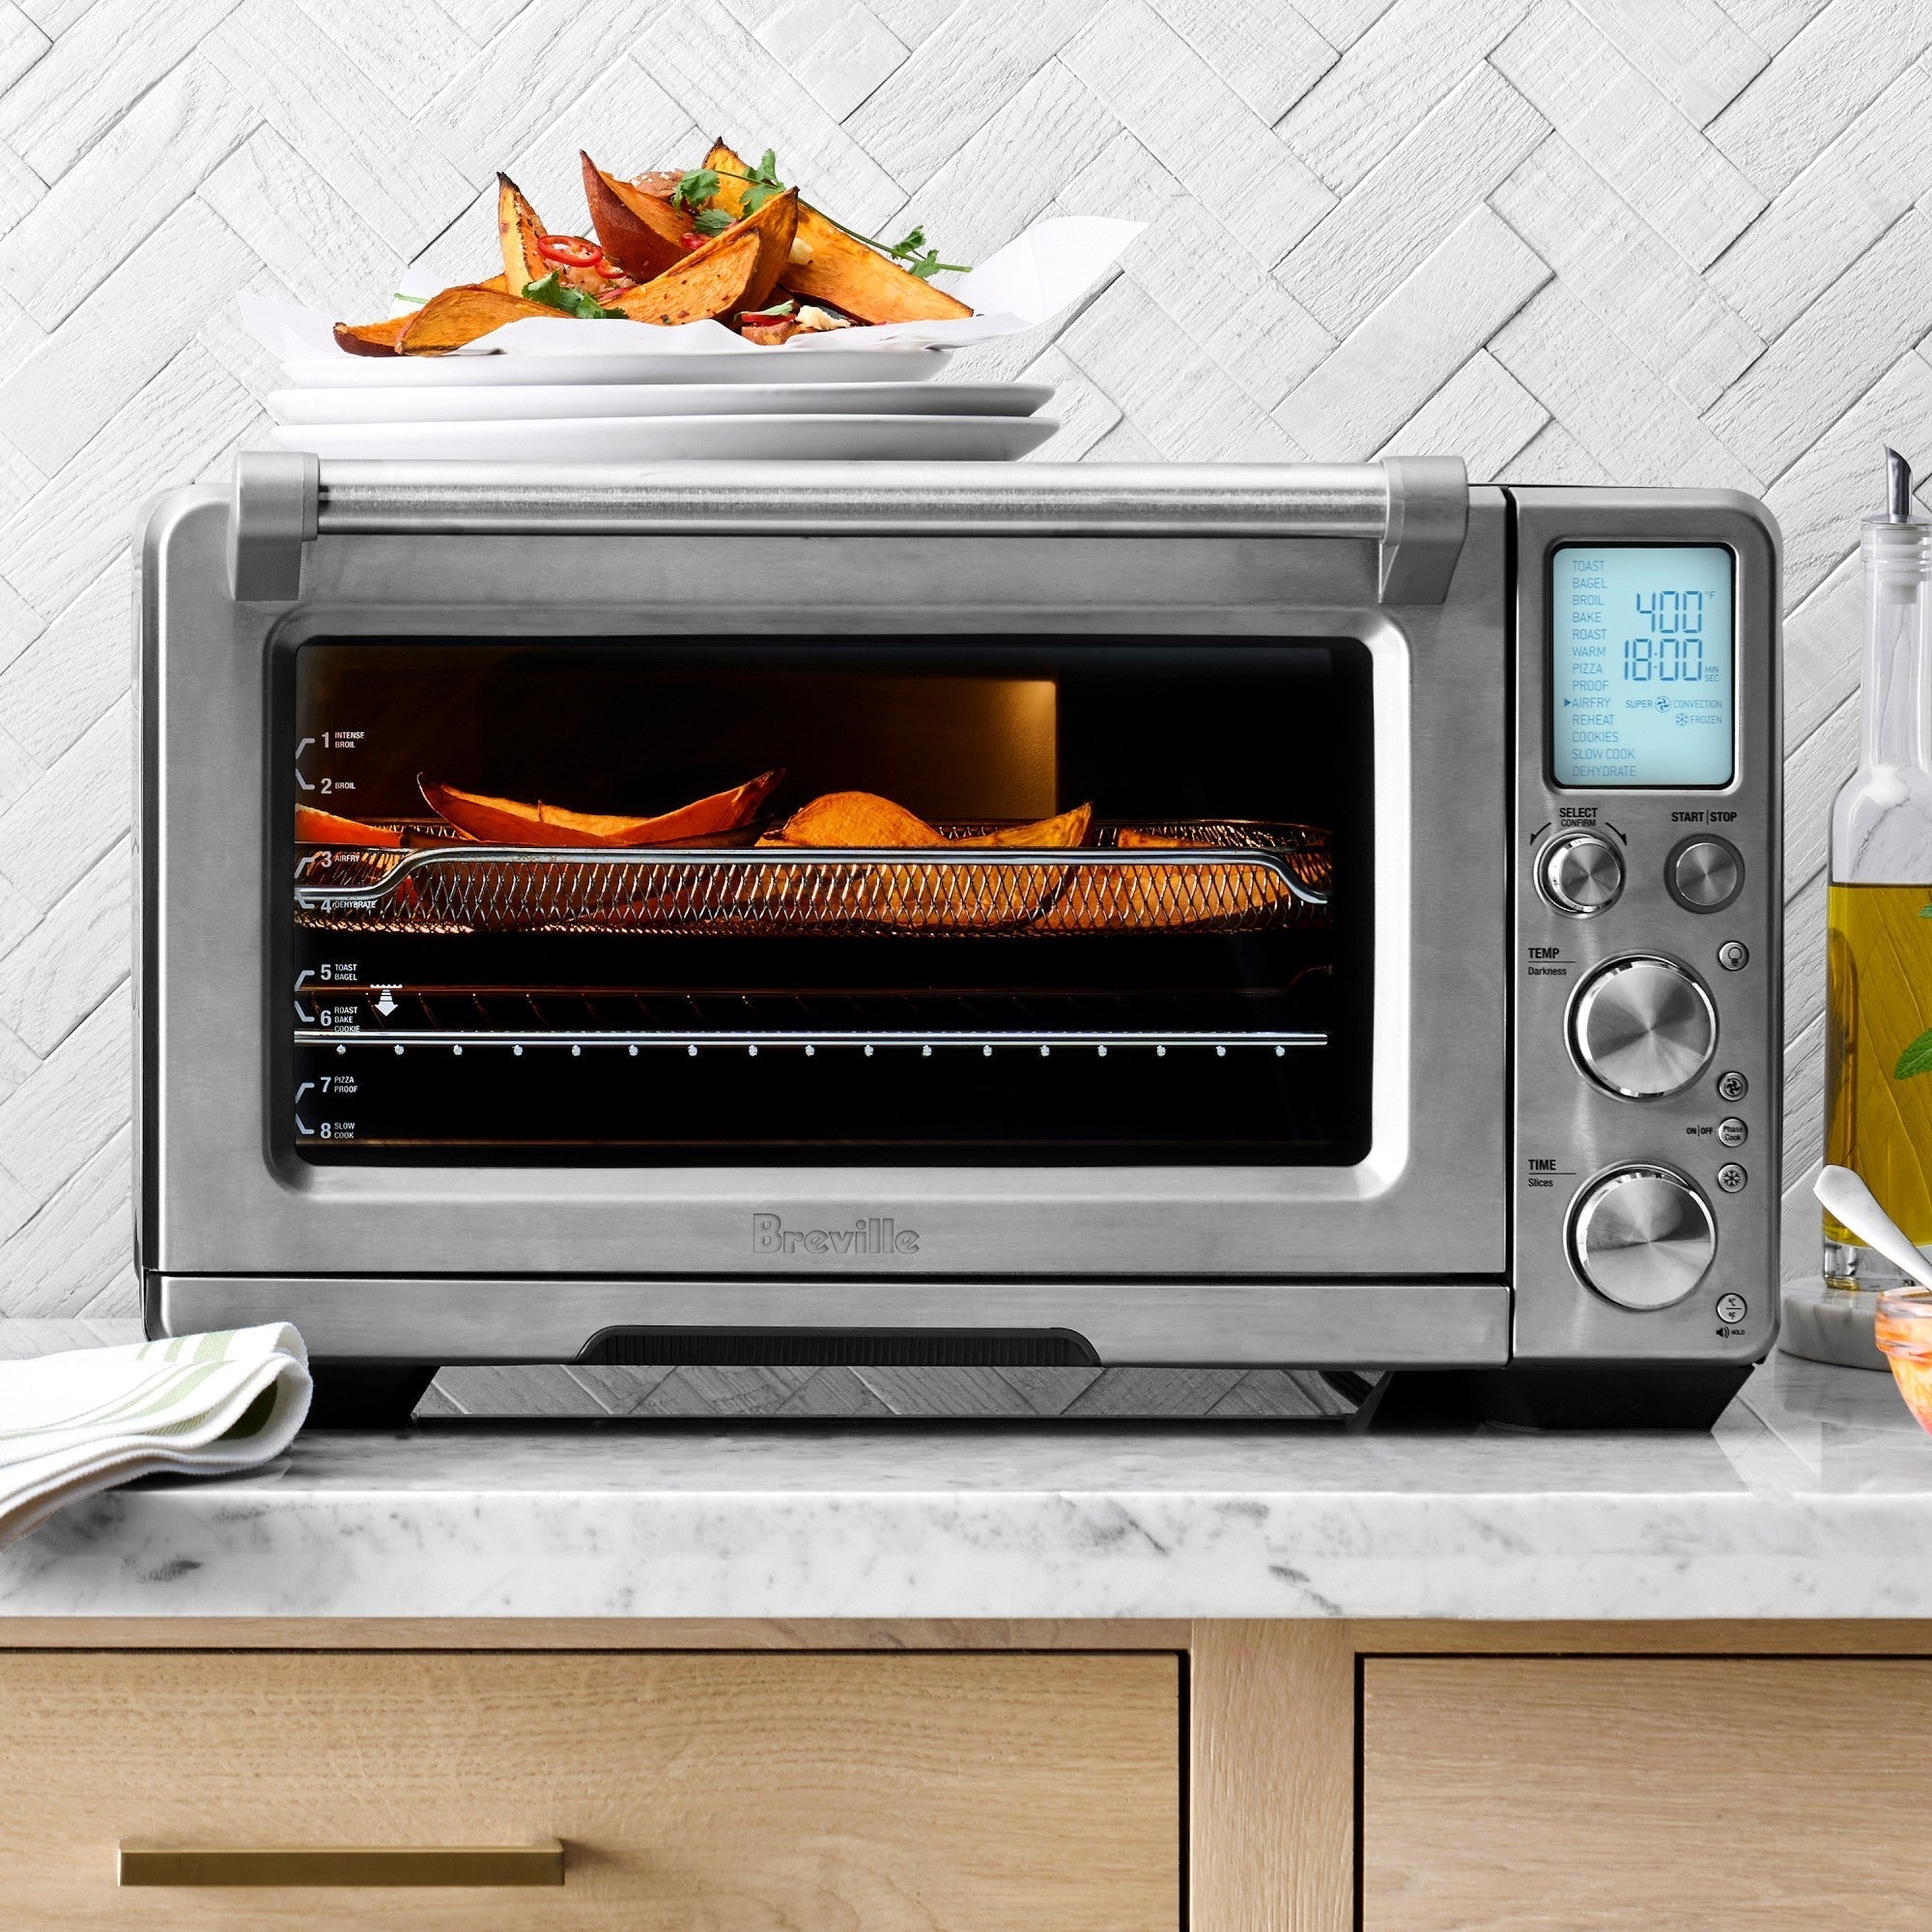 Breville Smart Oven® Air Fryer Pro – Yourgard